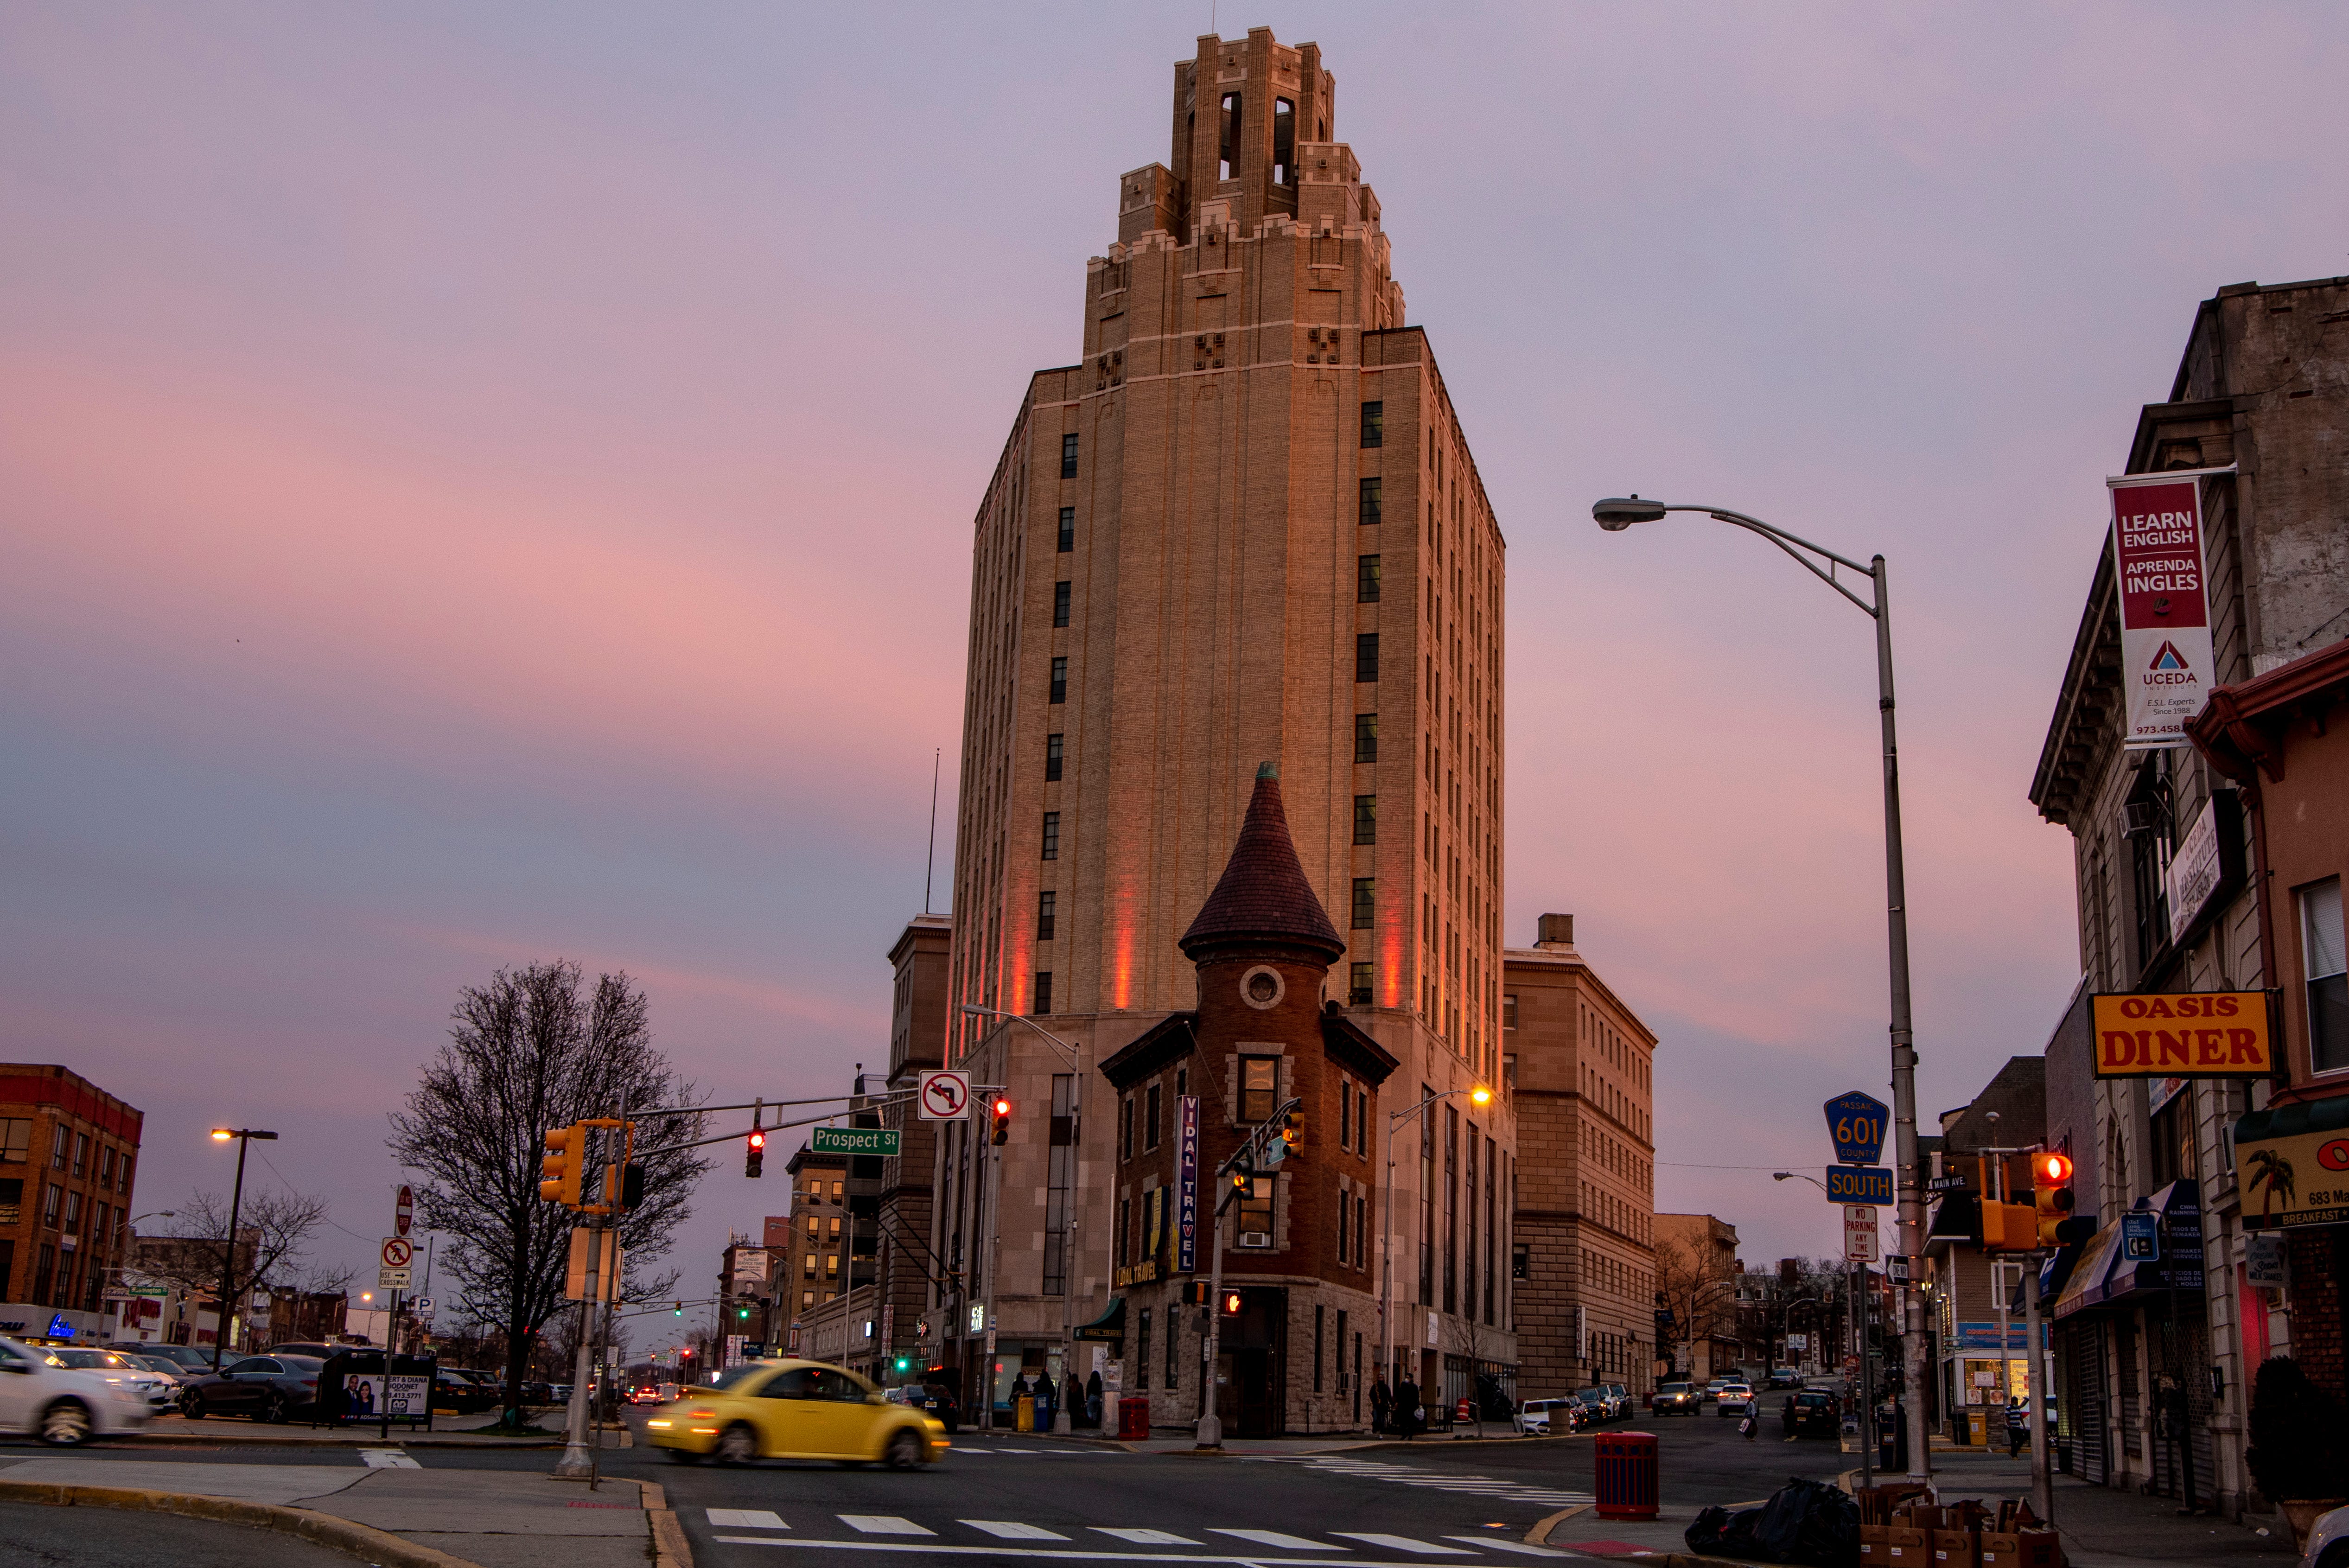 As the sun sets, the clouds turn the color of cotton candy behind the 11-story Art Deco building that sits at 663 Main Ave. The building was originally a bank when it opened in 1931, but now houses a Blink gym.